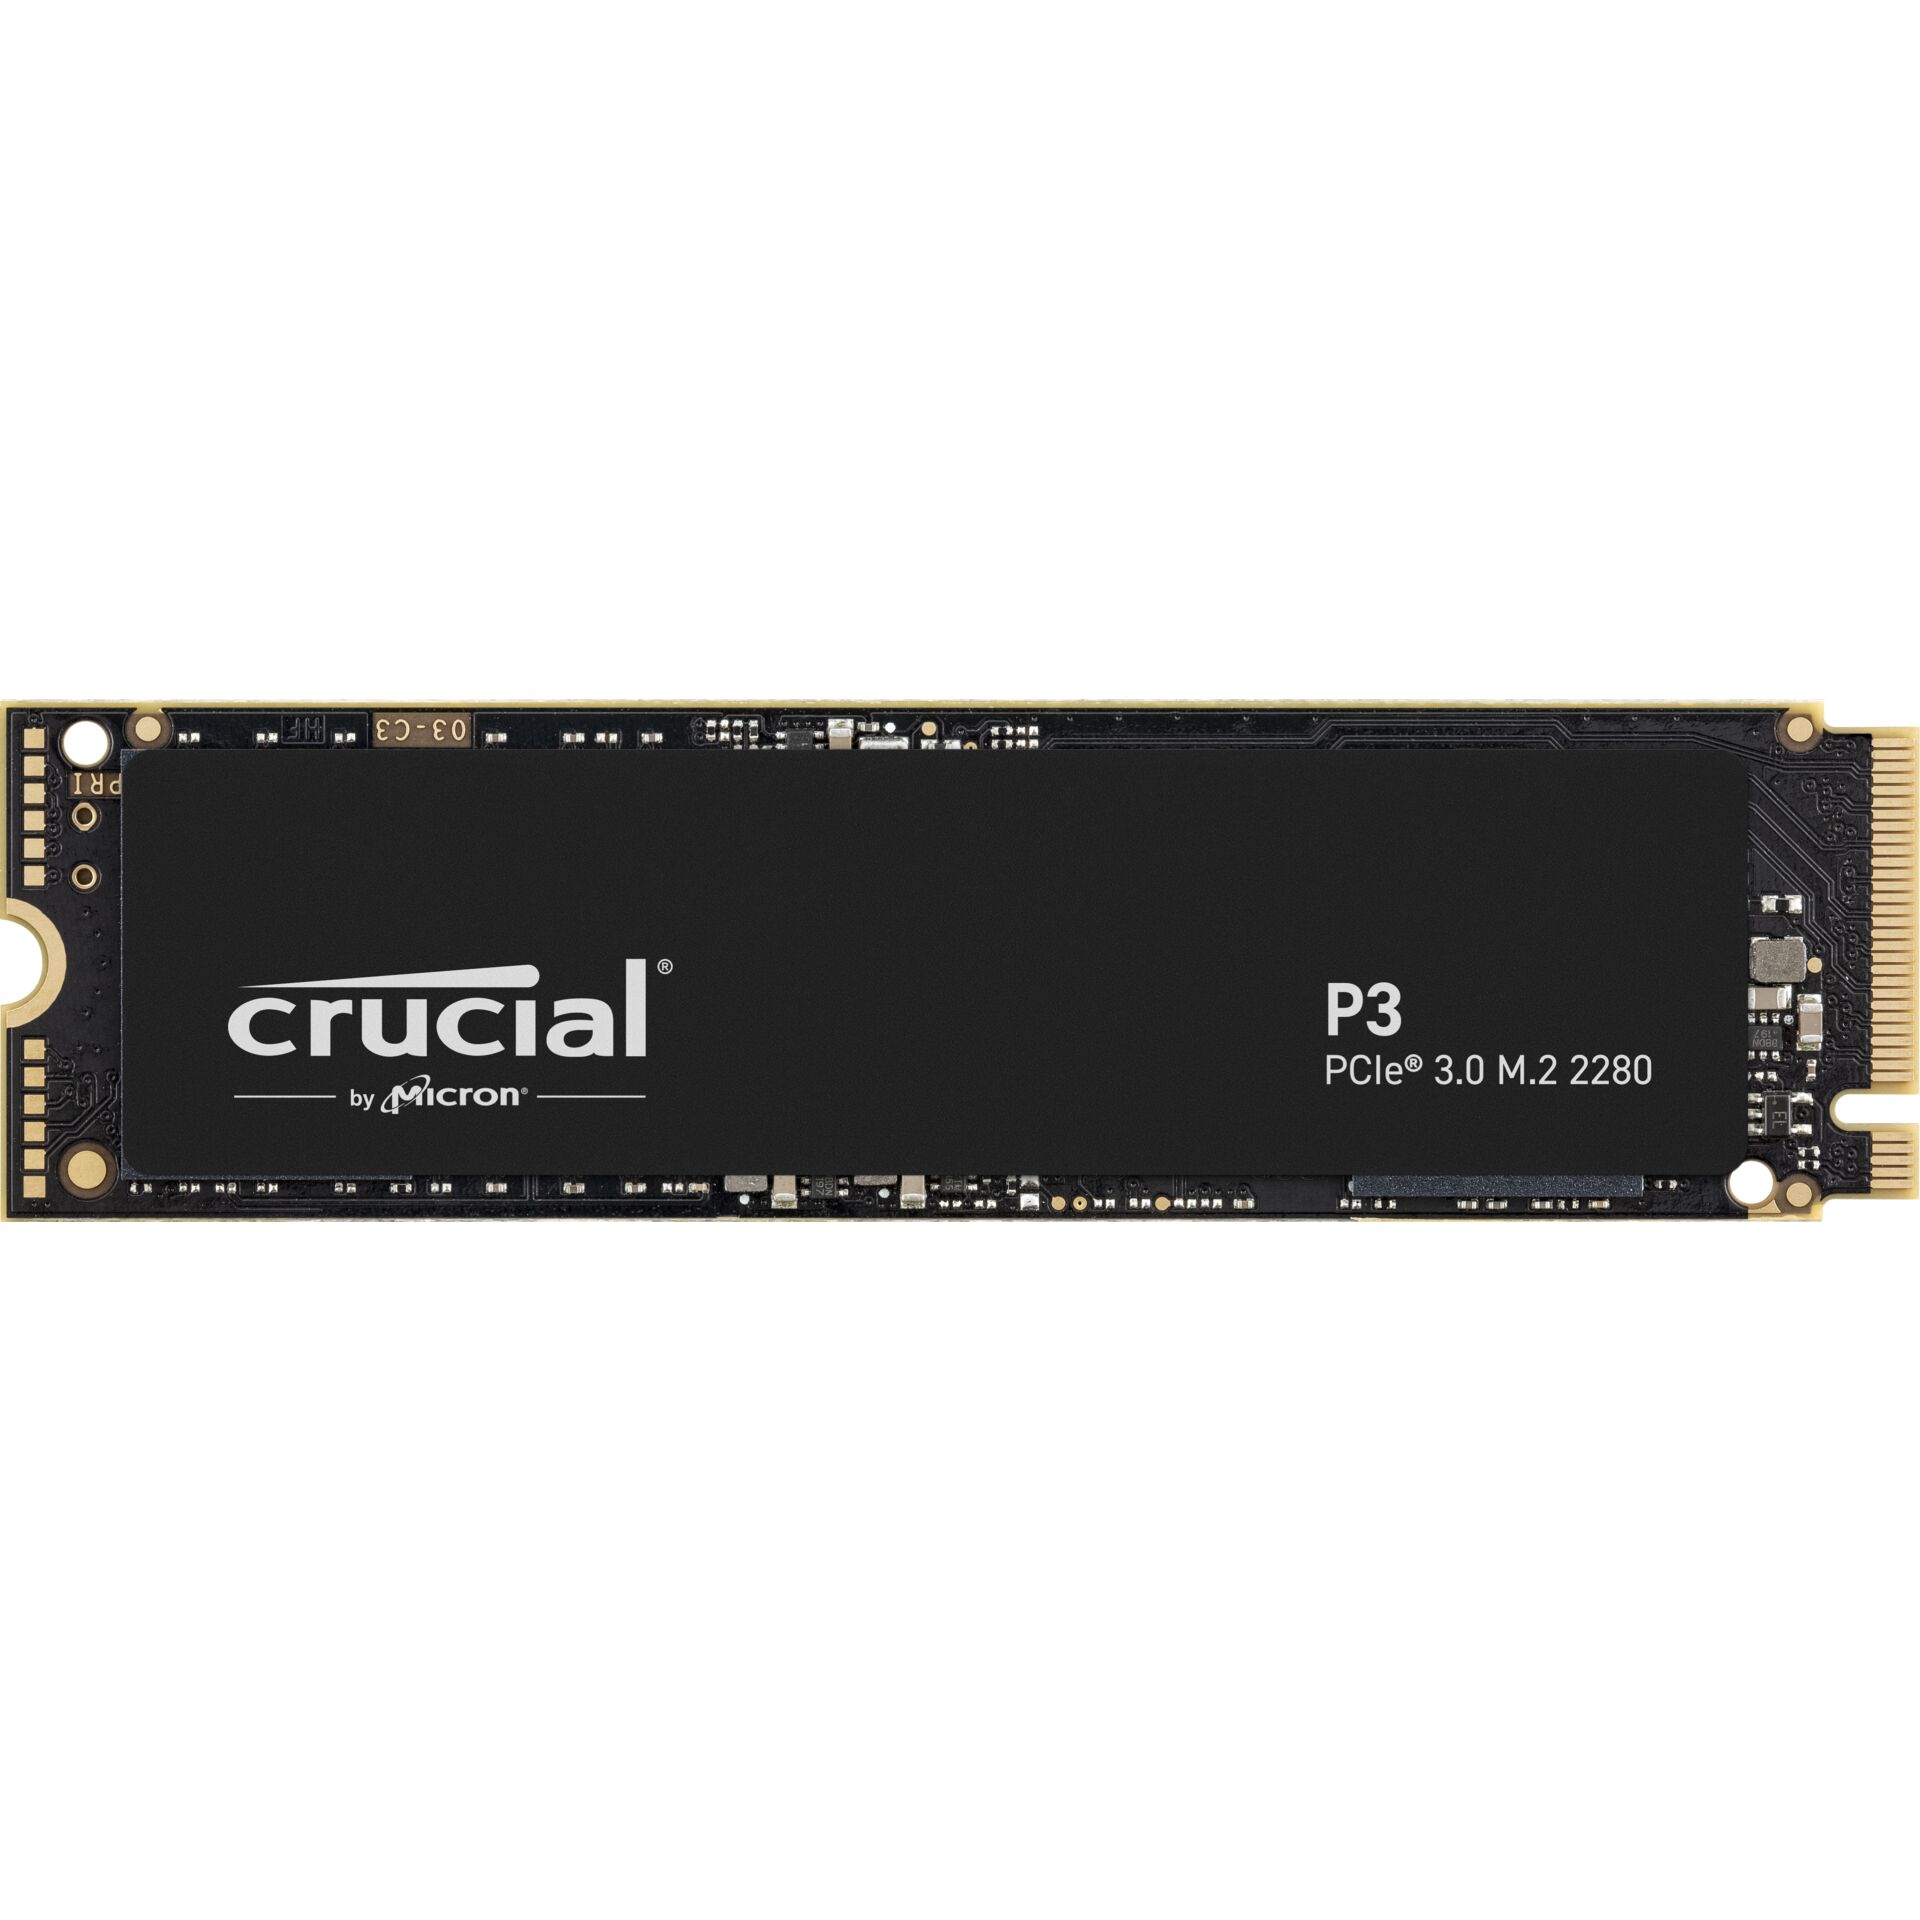 4.0 TB SSD Crucial P3 SSD, M.2/M-Key (PCIe 3.0 x4), lesen: 3500MB/s, schreiben: 3000MB/s SLC-Cached, TBW: 800TB